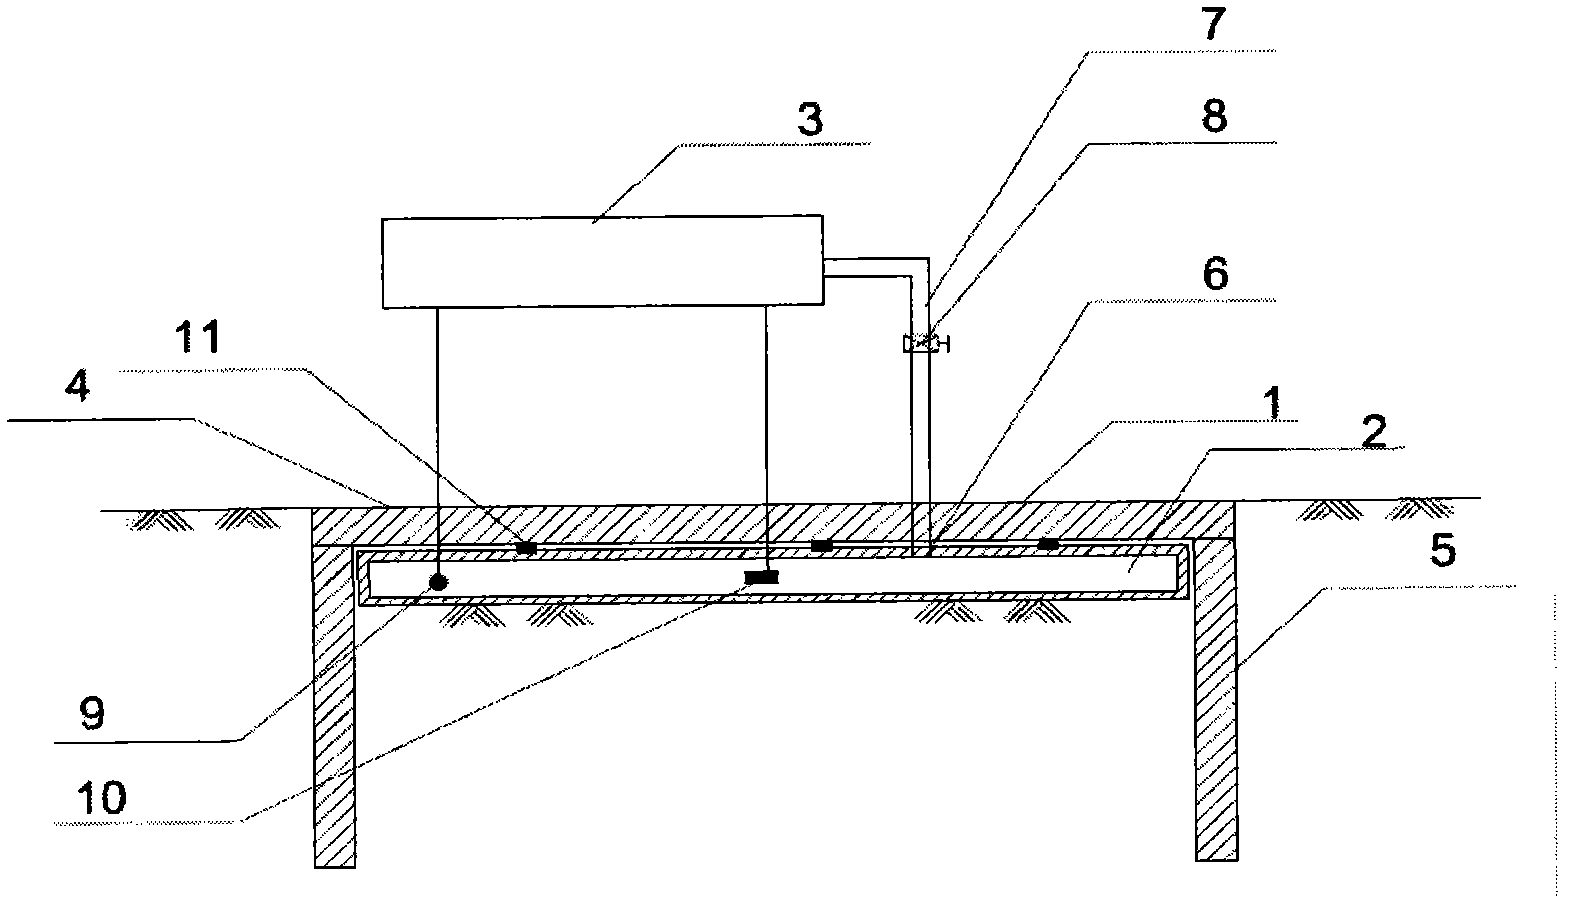 Foundation system capable of controlling settlement